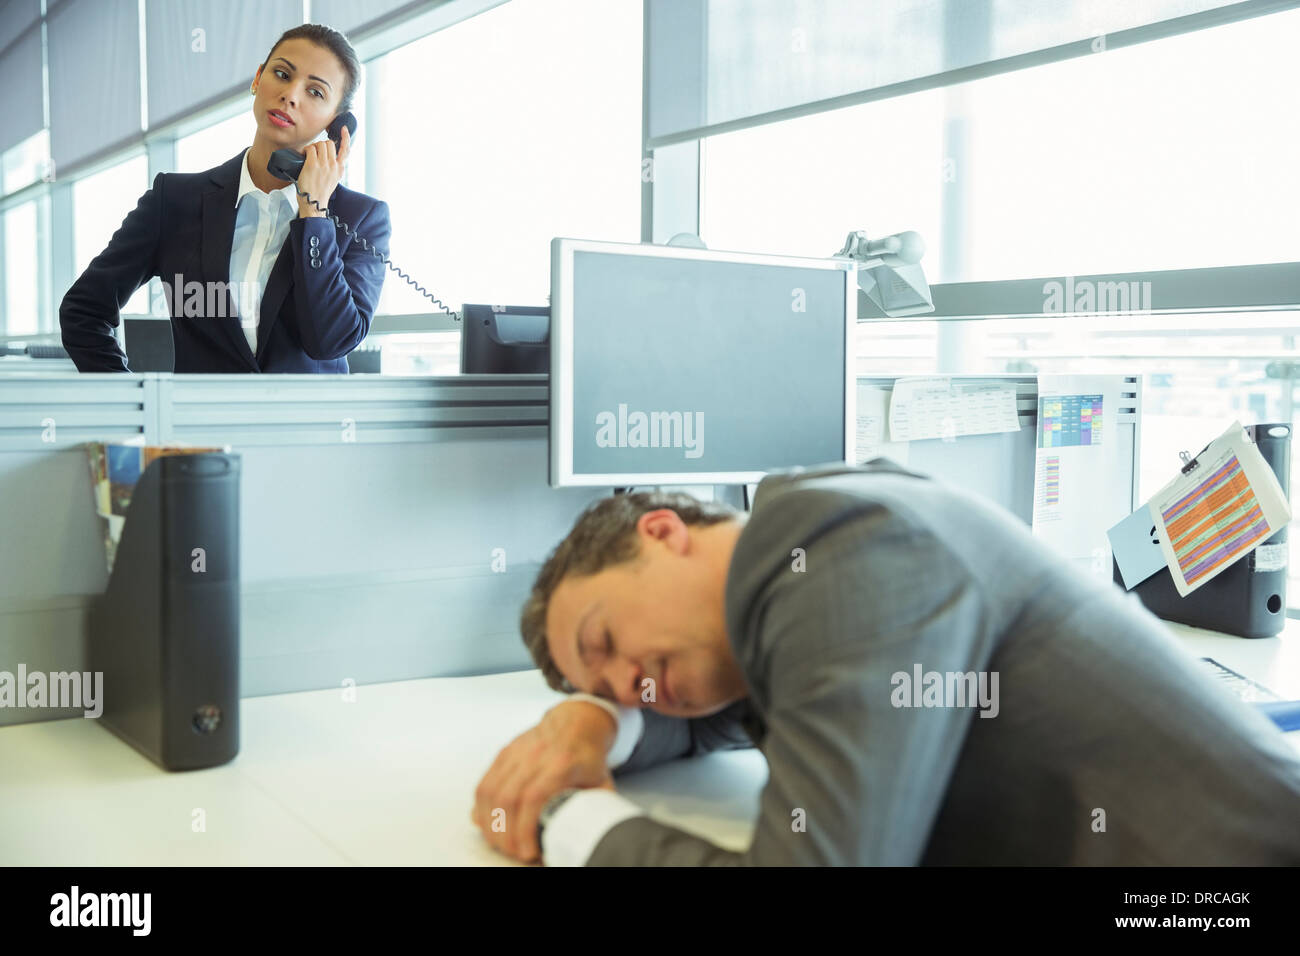 Businessman sleeping at desk in office Banque D'Images